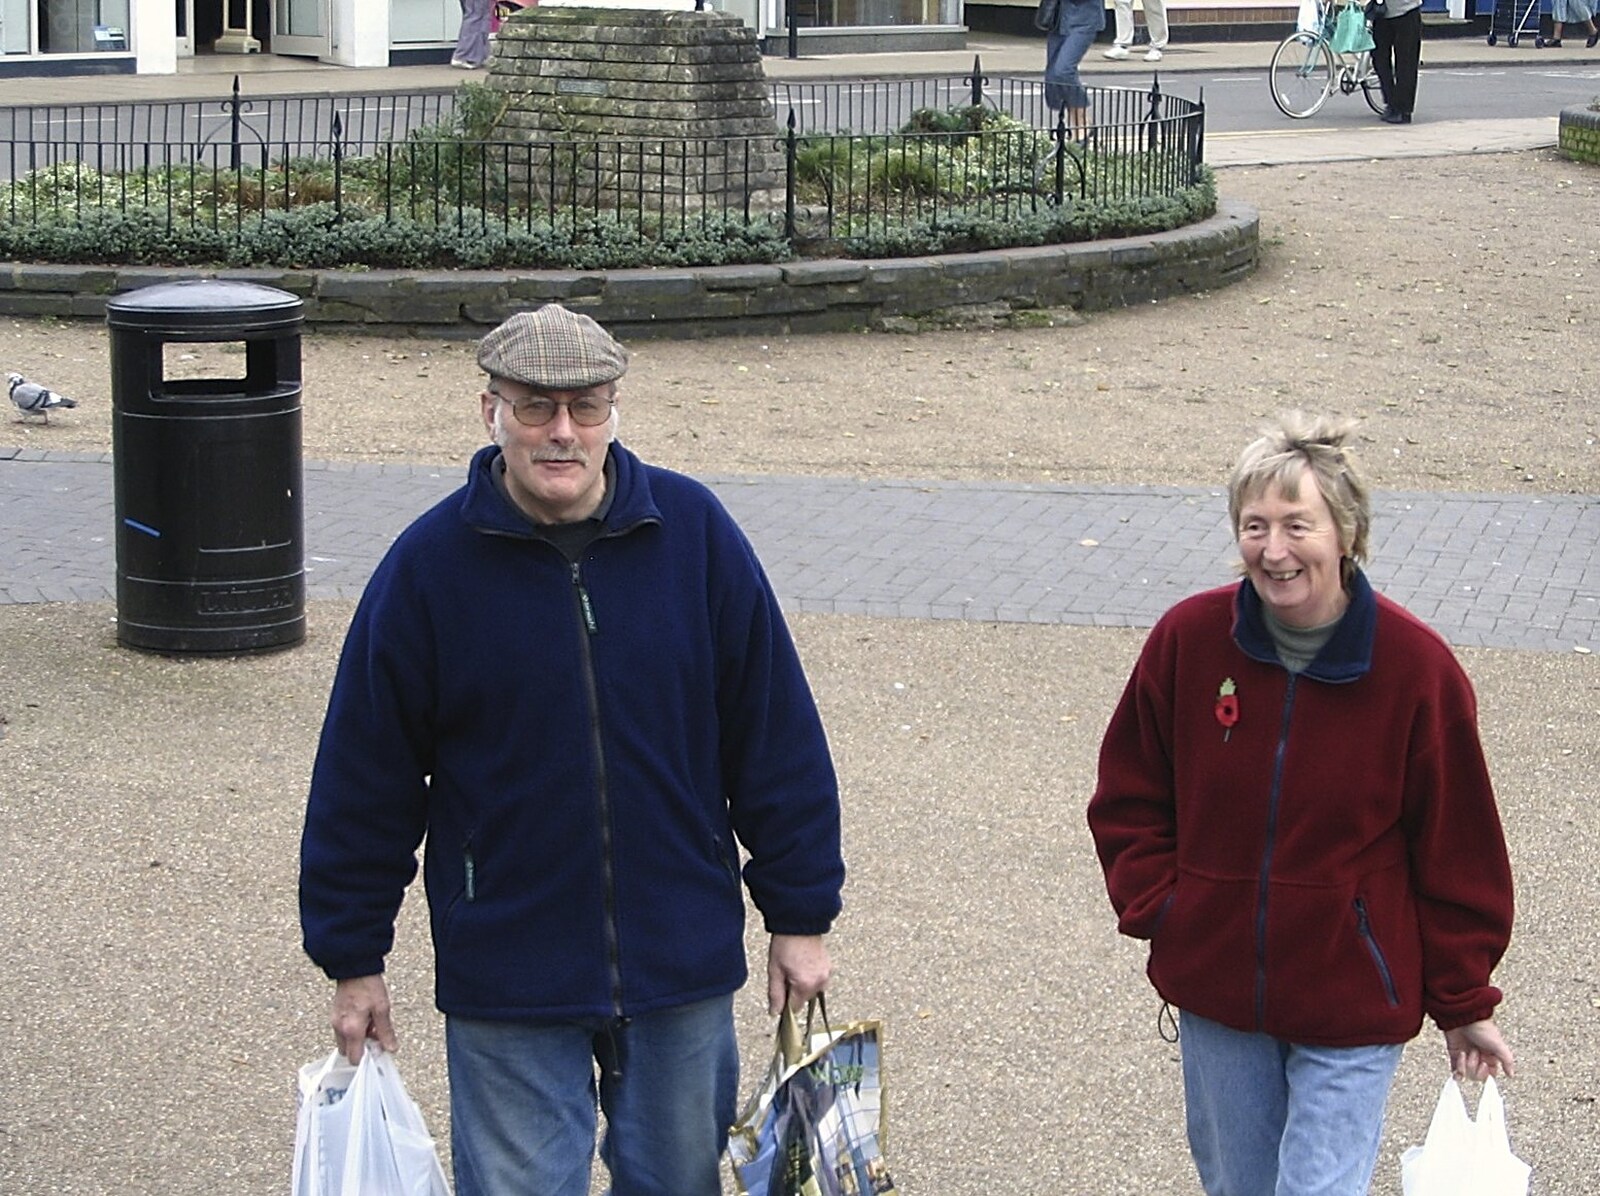 Bindery Dave and Bindery Sue are spotted in Diss from Feeding the Ducks: a Diss and Norwich Miscellany - 7th November 2004